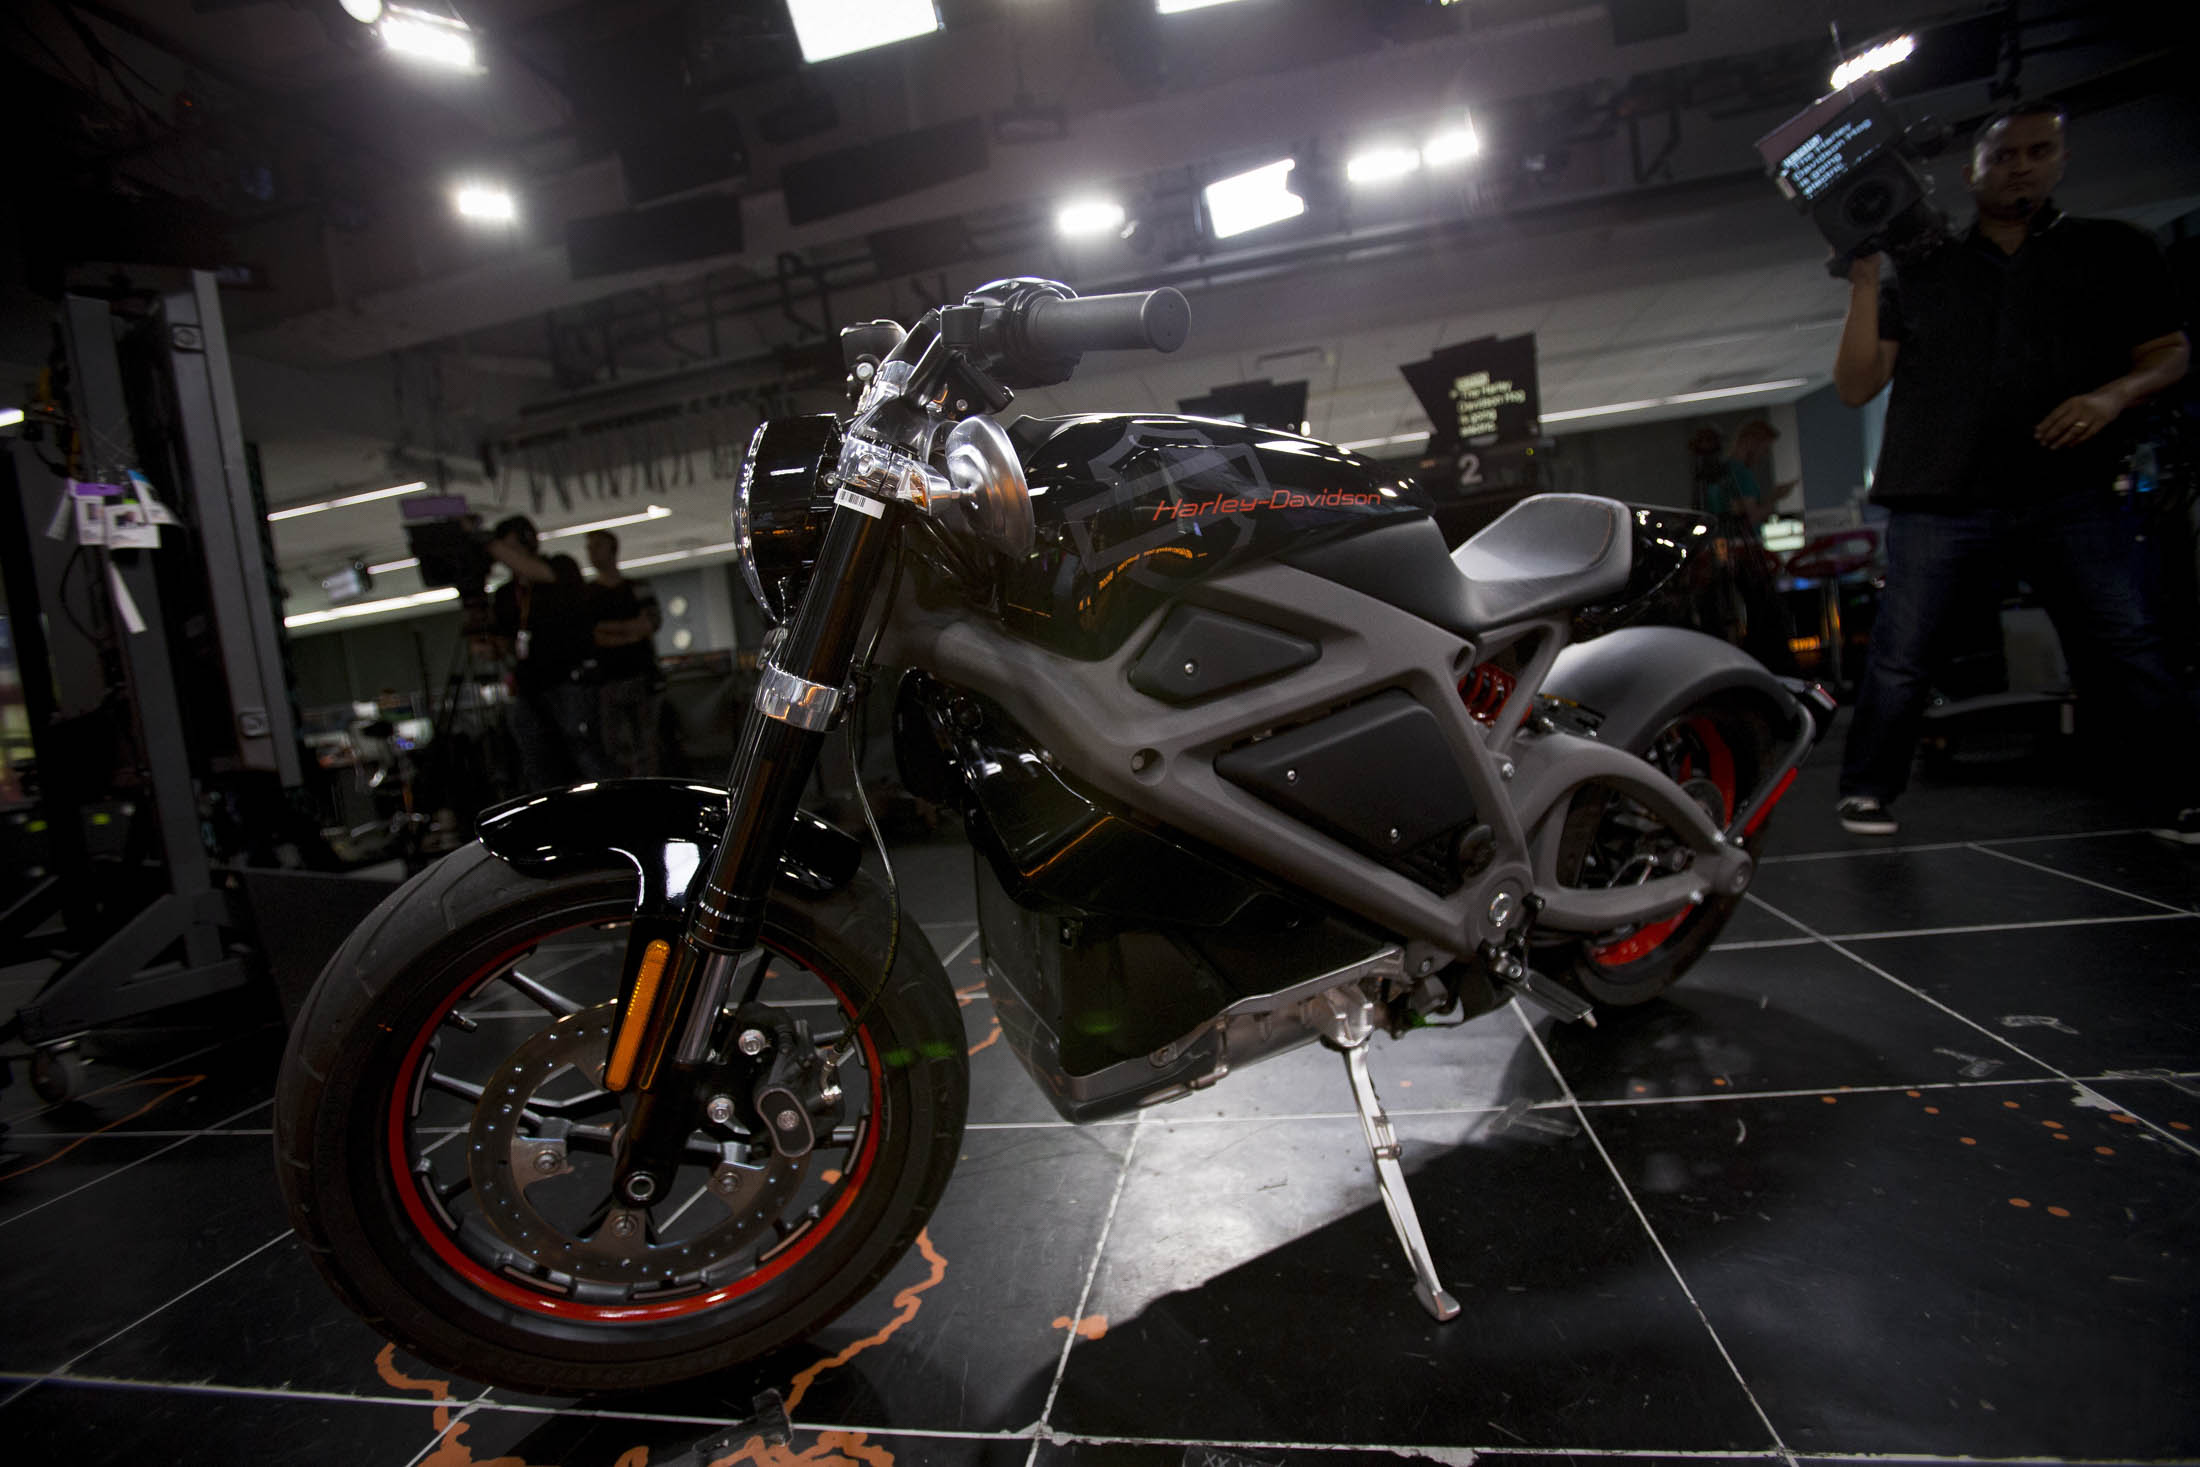 A Harley-Davidson Inc. LiveWire electric motorcycle sits parked in the Bloomberg Television studios in New York, U.S., on Monday, June 23, 2014. Harley-Davidson Inc., whose storied highway cruisers are as loud as they are large, will take 22 electric bikes on a U.S. tour to solicit reactions that will help shape the environmentally aware vehicle's development. Depending on the feedback, the no-exhaust Harley may never make it out of R&D. Photographer: Scott Eells/Bloomberg